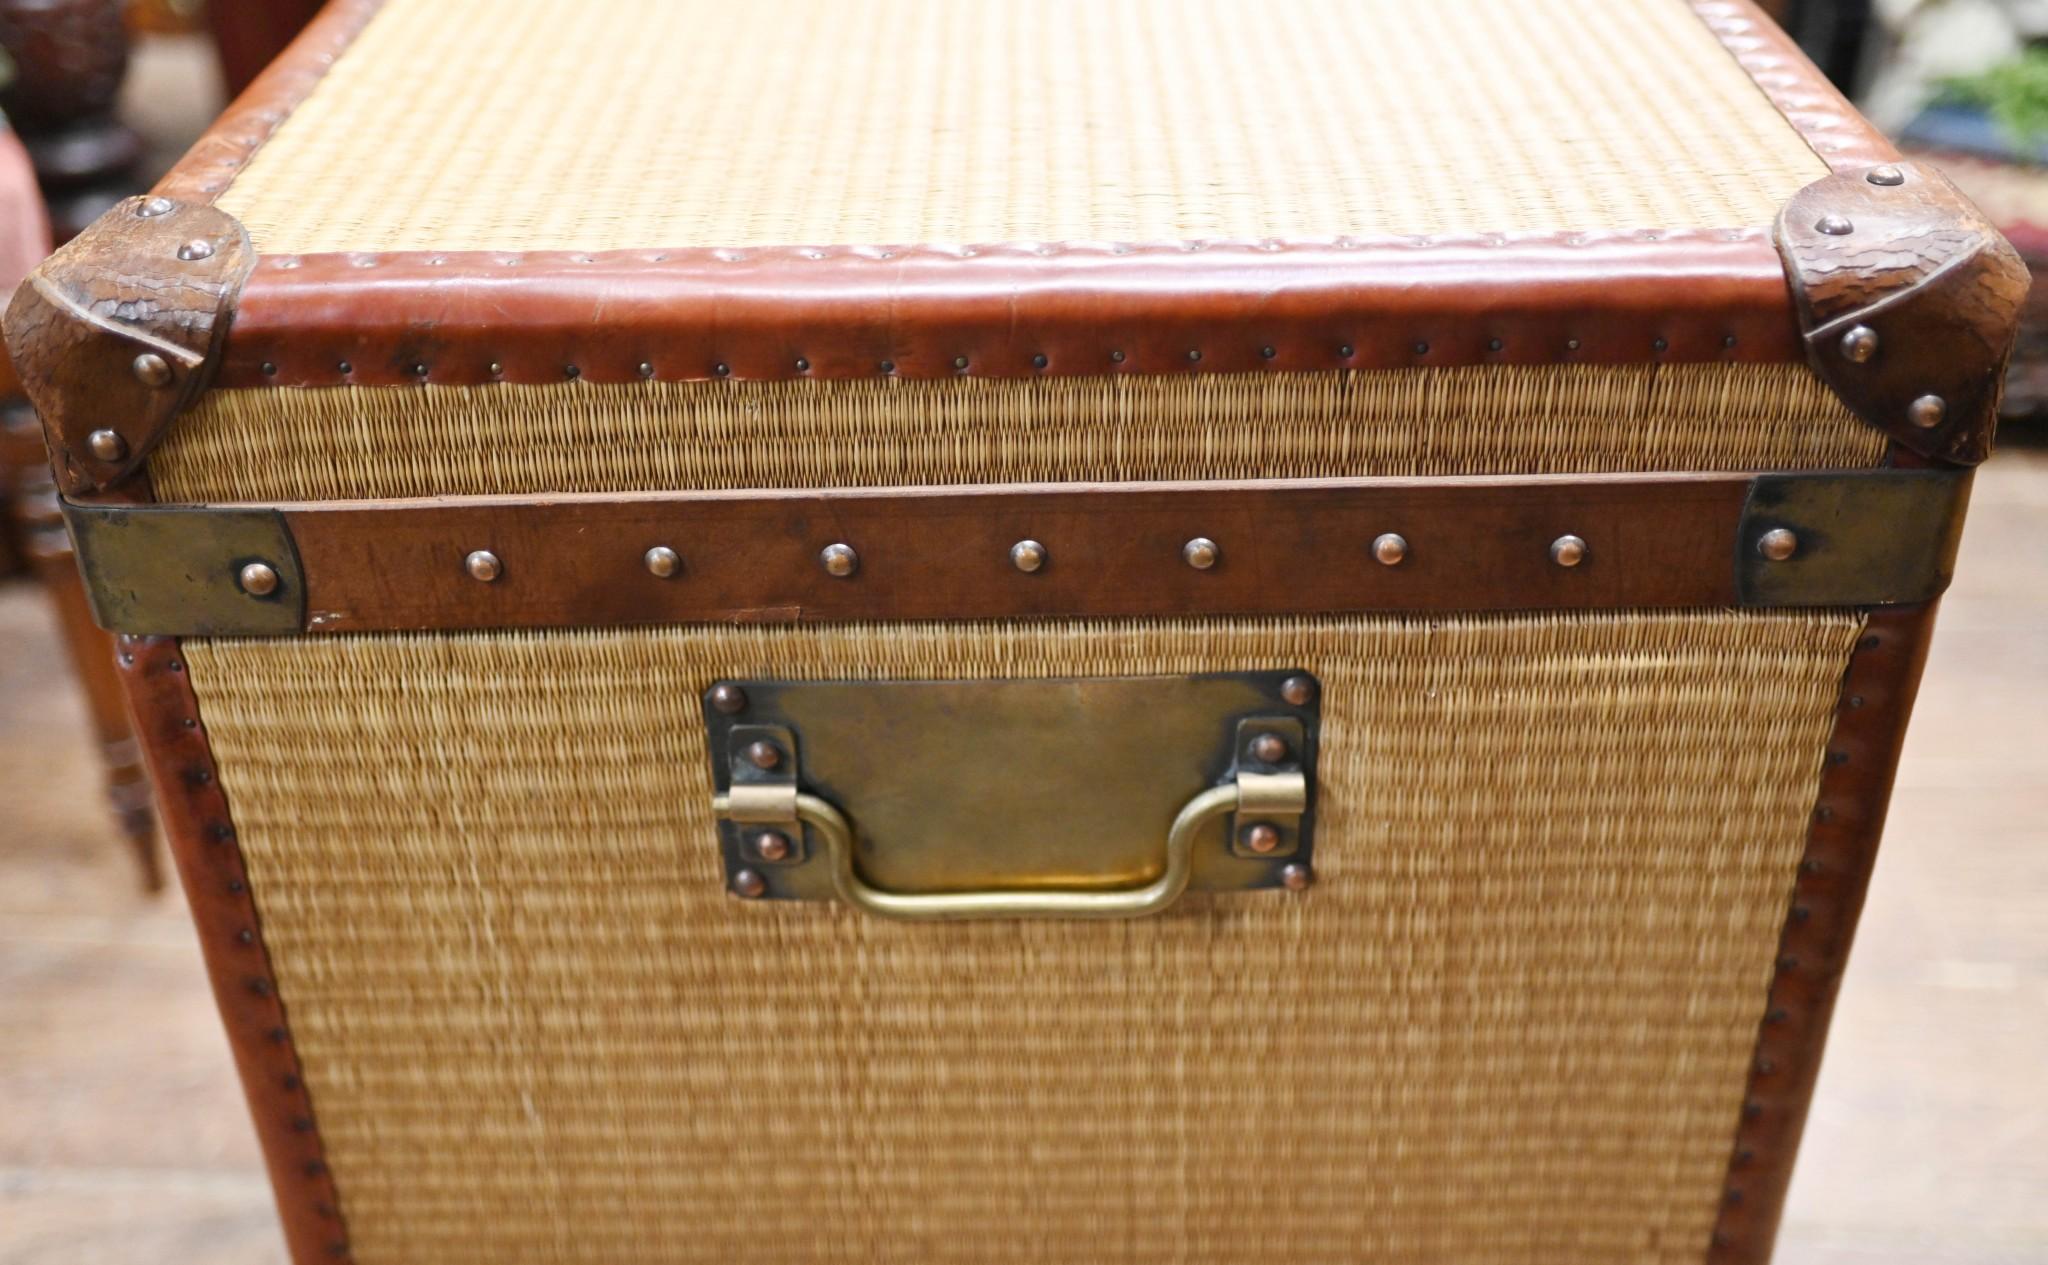 old fashioned luggage trunks